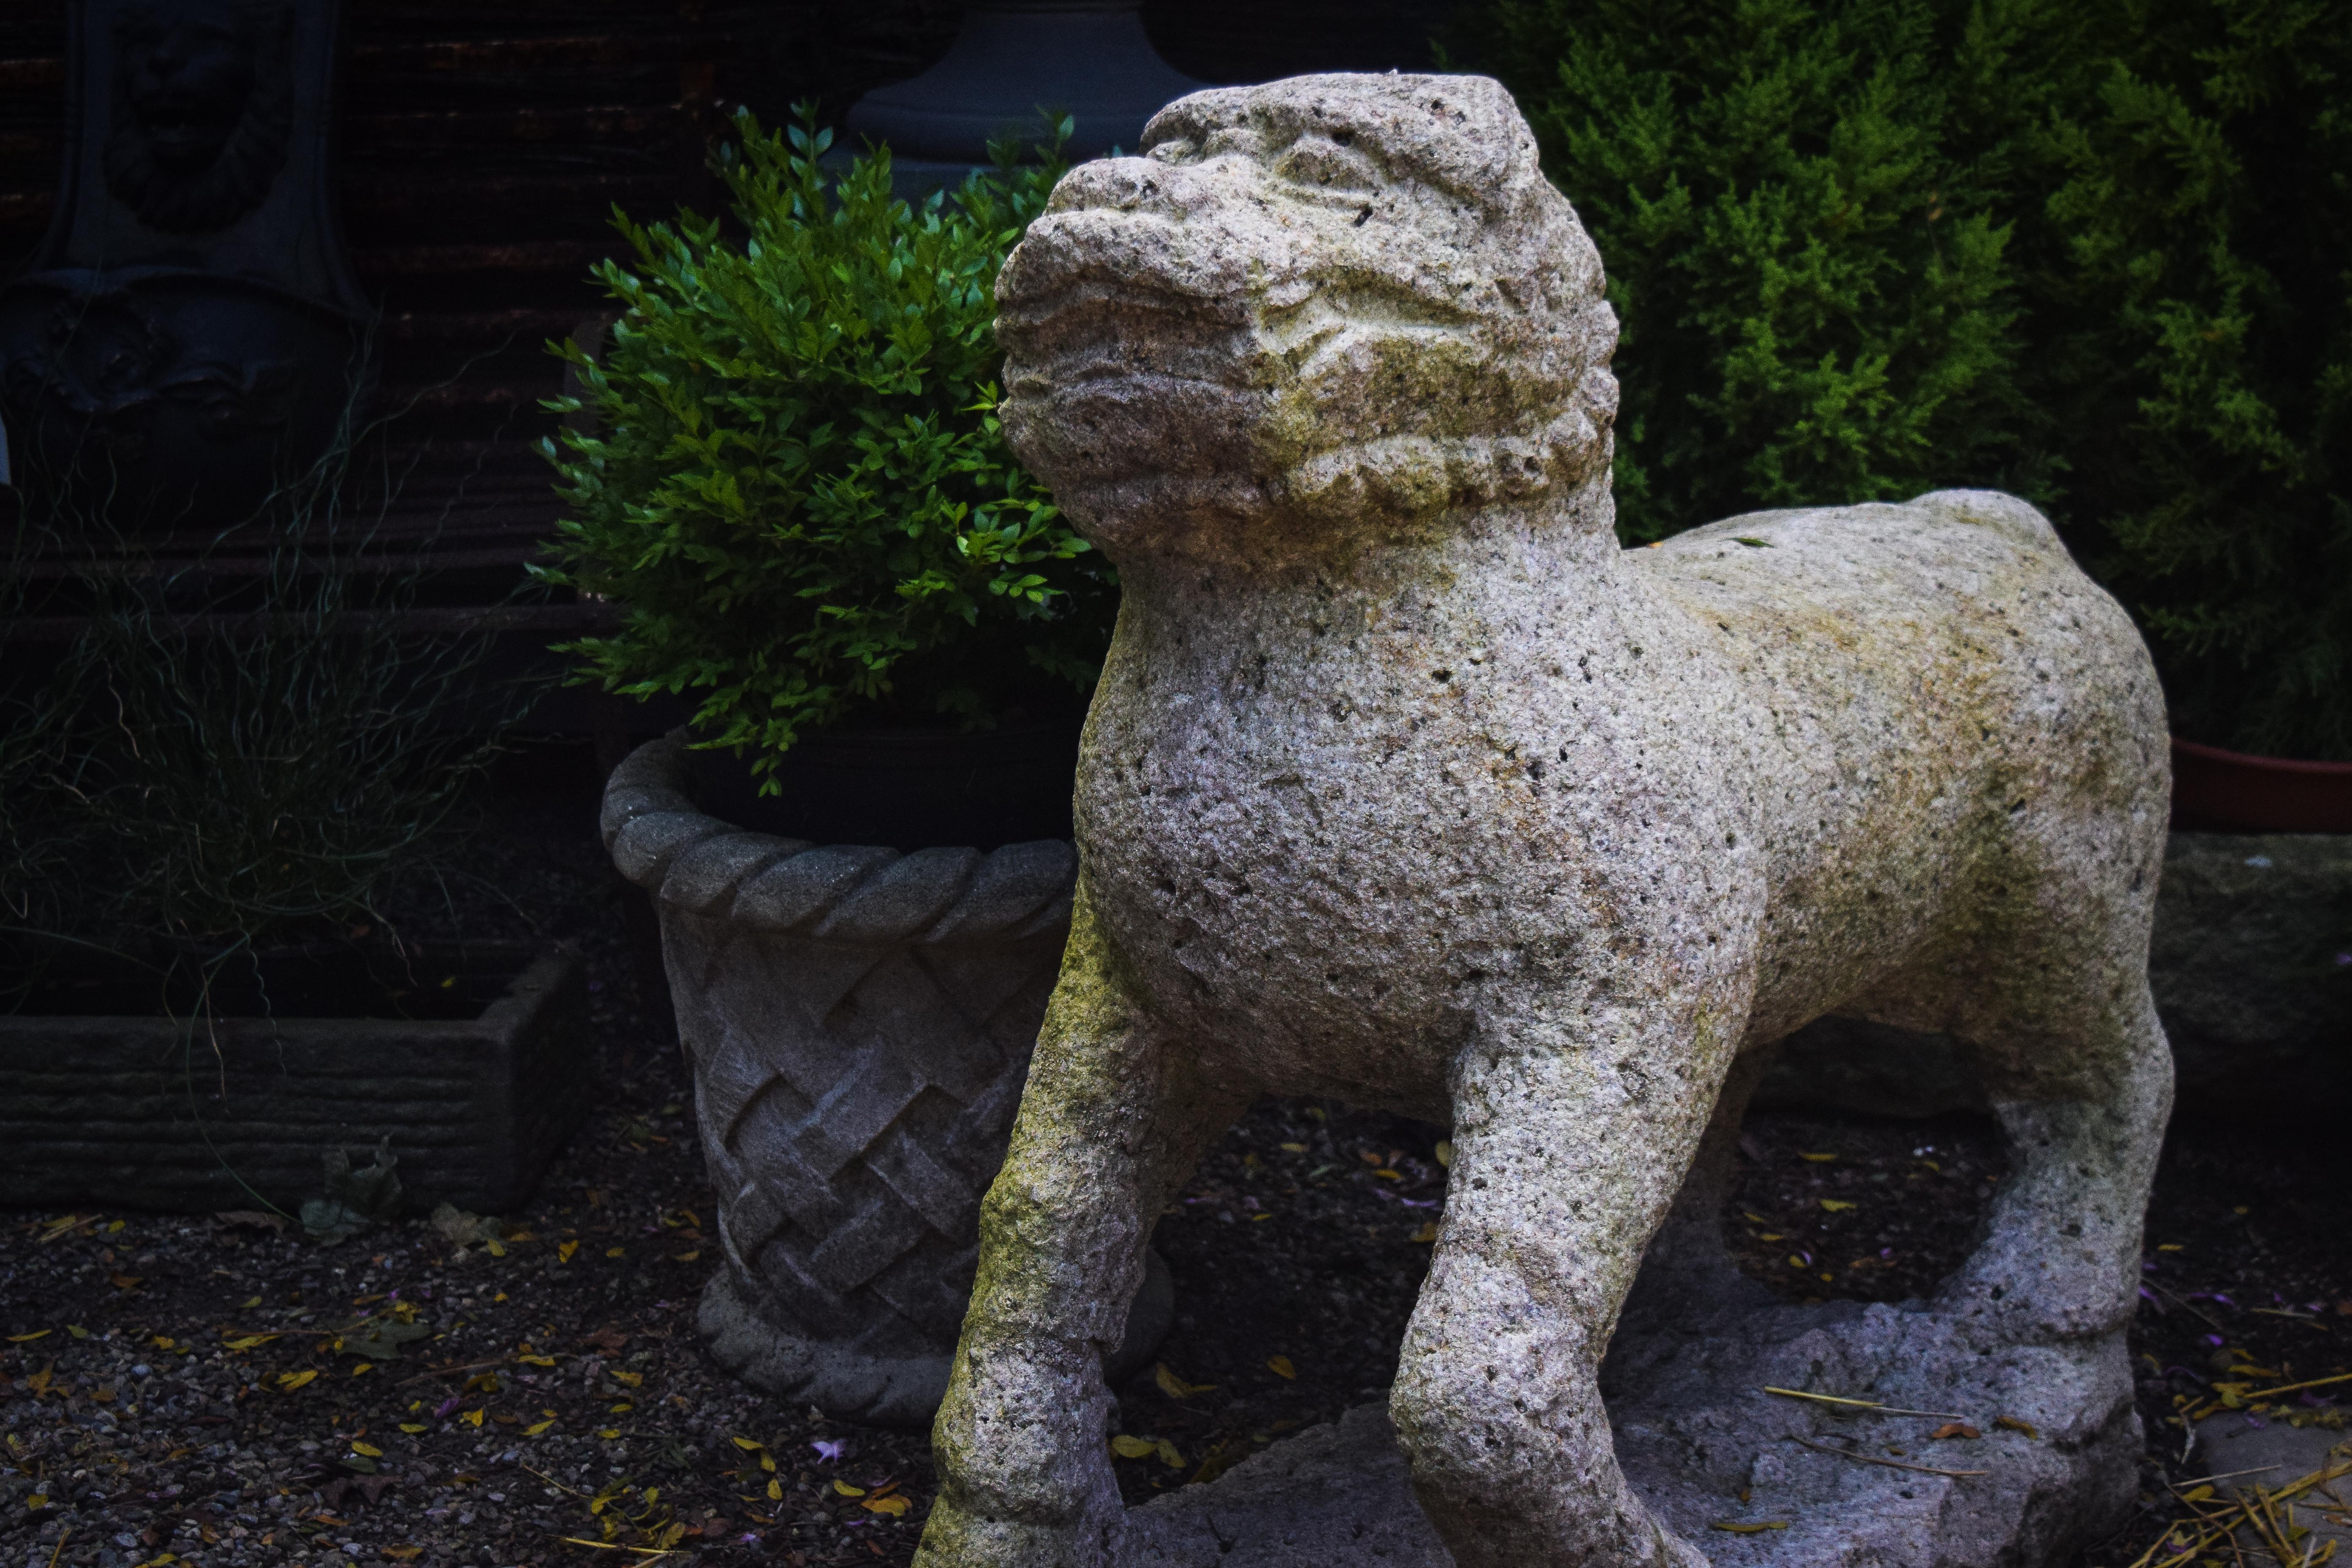 Known in English as lion dogs or foo dog, these guardian statues originate from Chinese Buddhism. These stone lions known as shishi are a highly stylized creature meant to protect the building from harmful spirits. This vintage garden lion is a rare